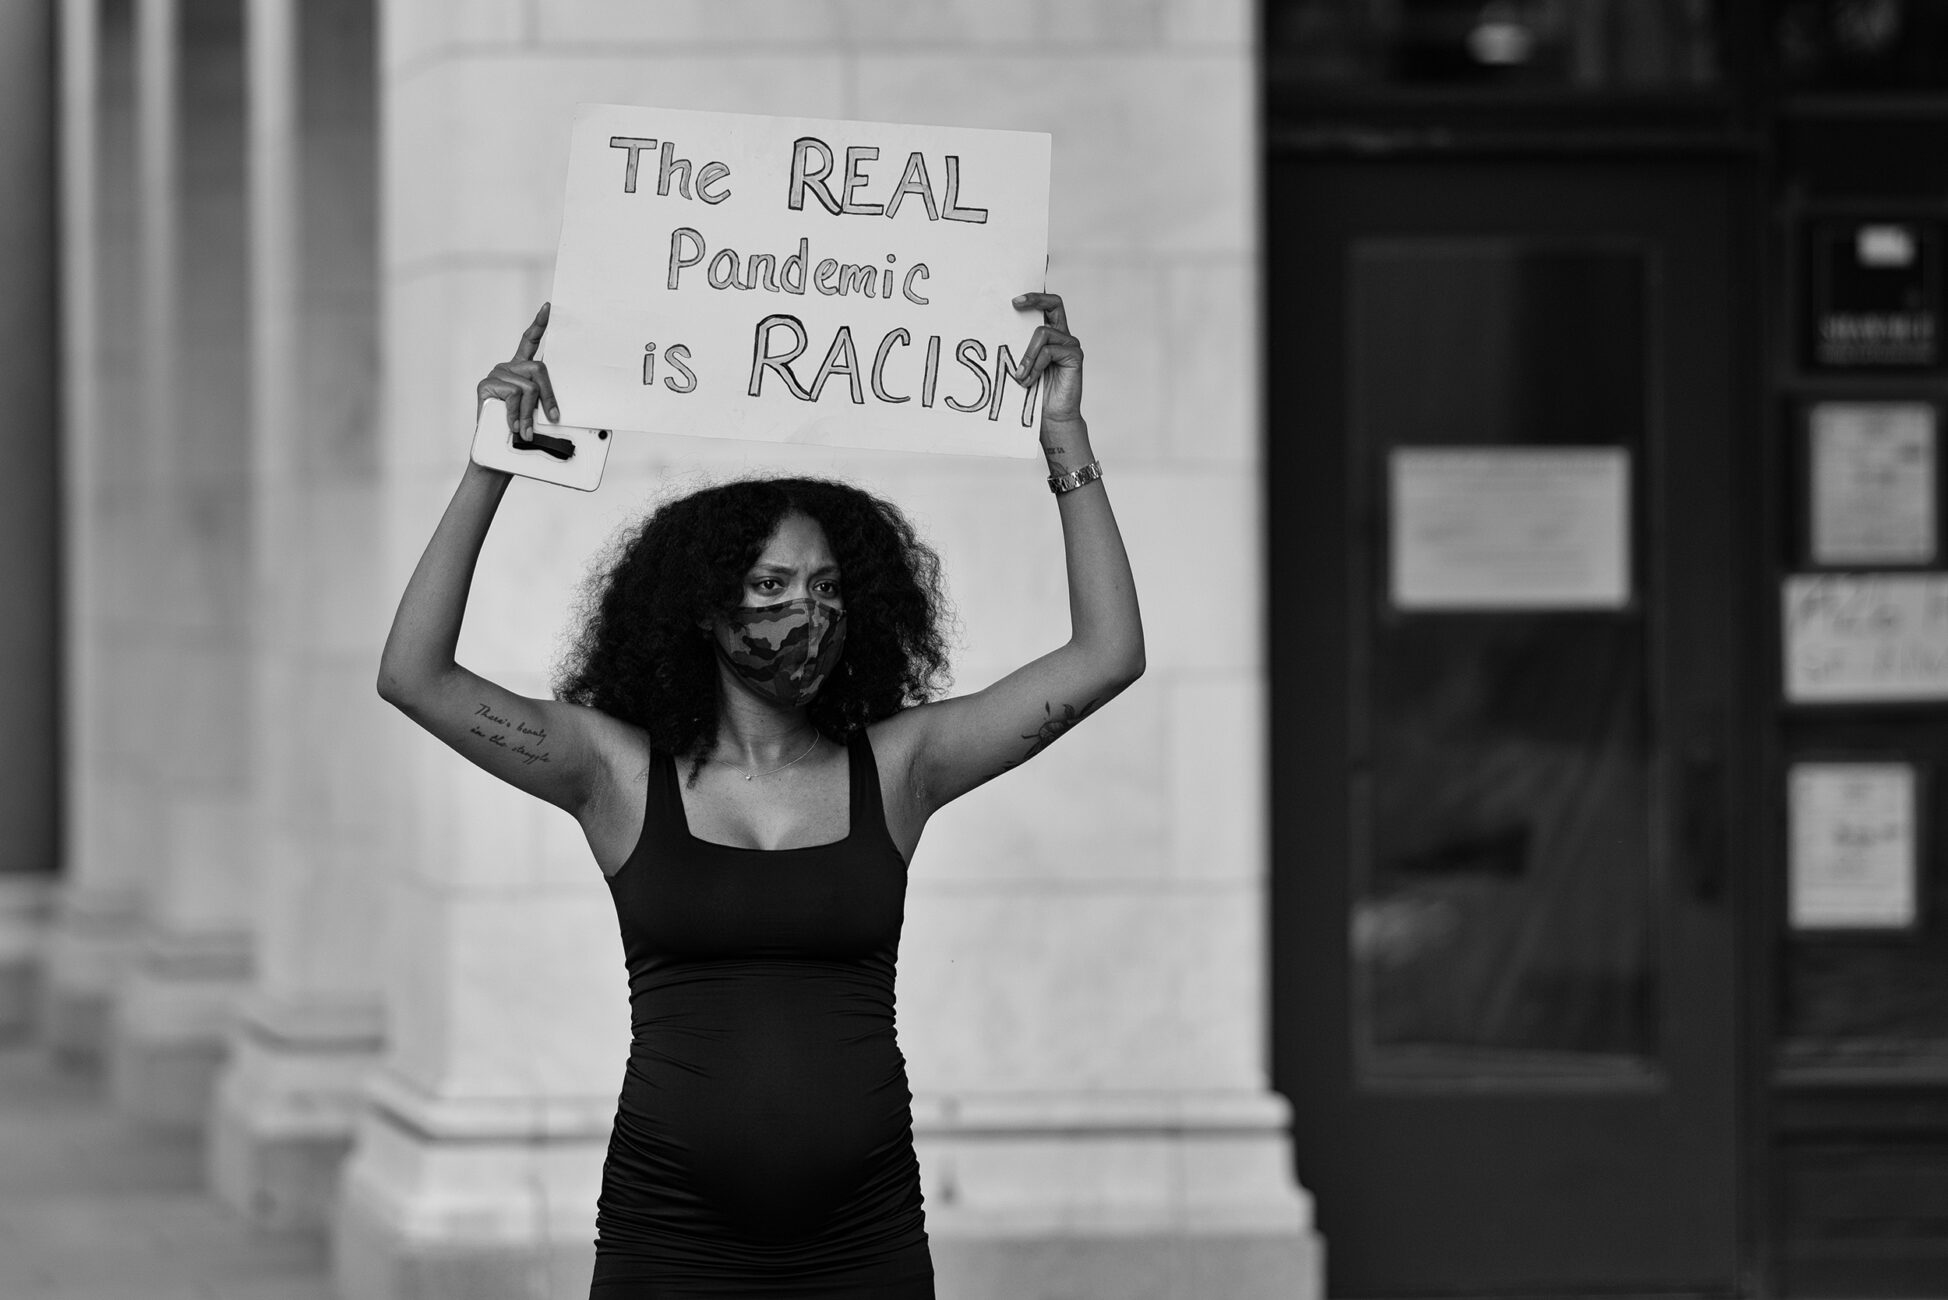 A woman participates in a Black Lives Matter protest in Washington, D.C. (photo by Miki Jourdan, Flickr)